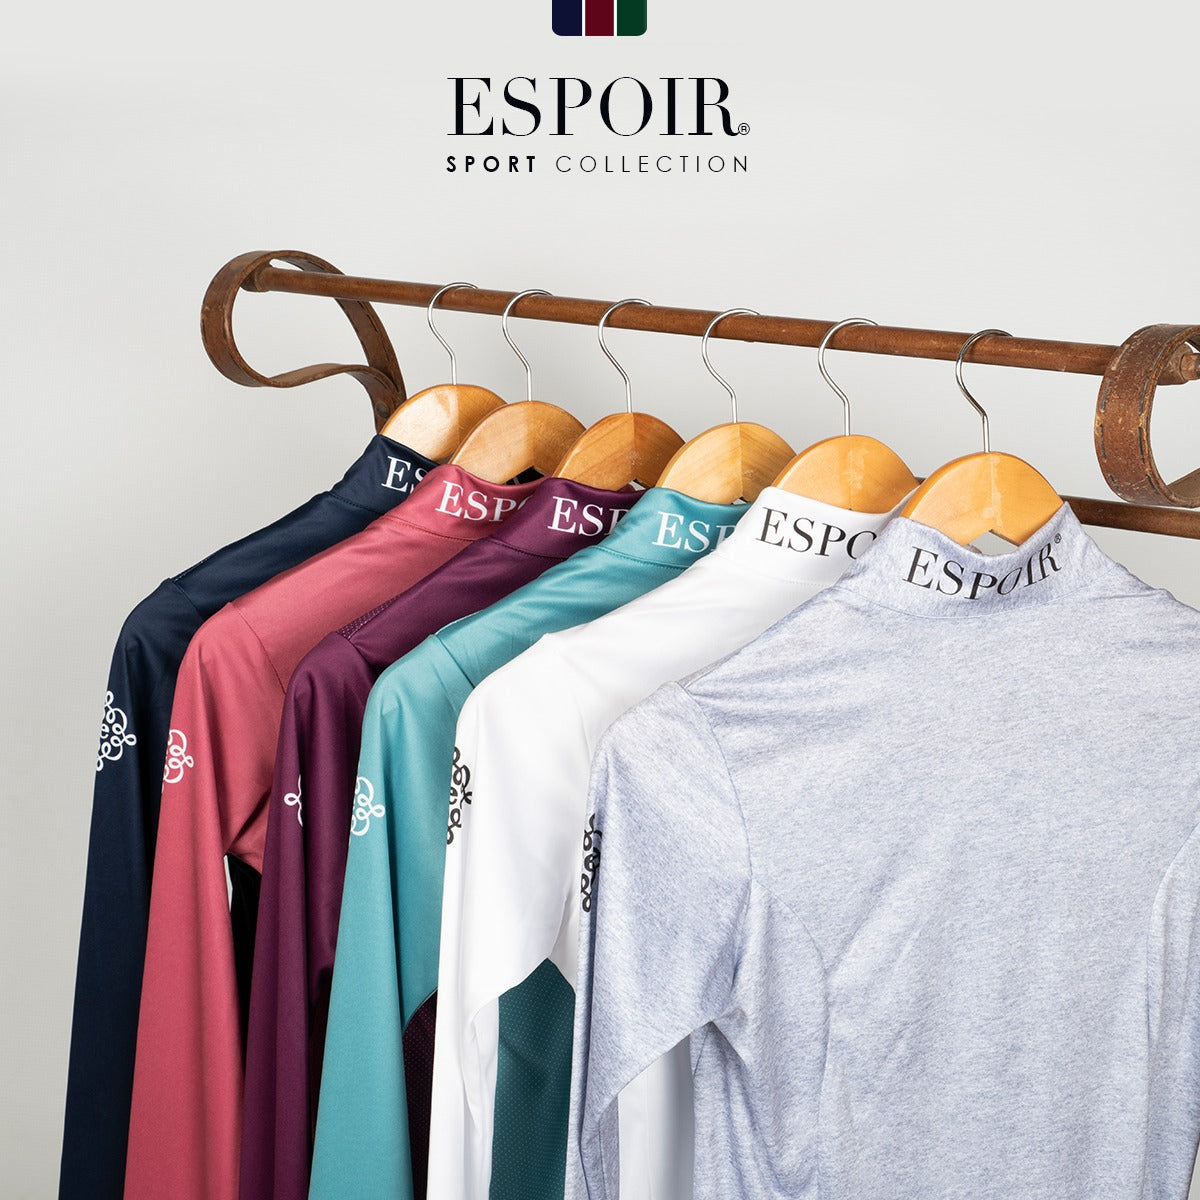 Espoir Sport Collection New for Fall 2021